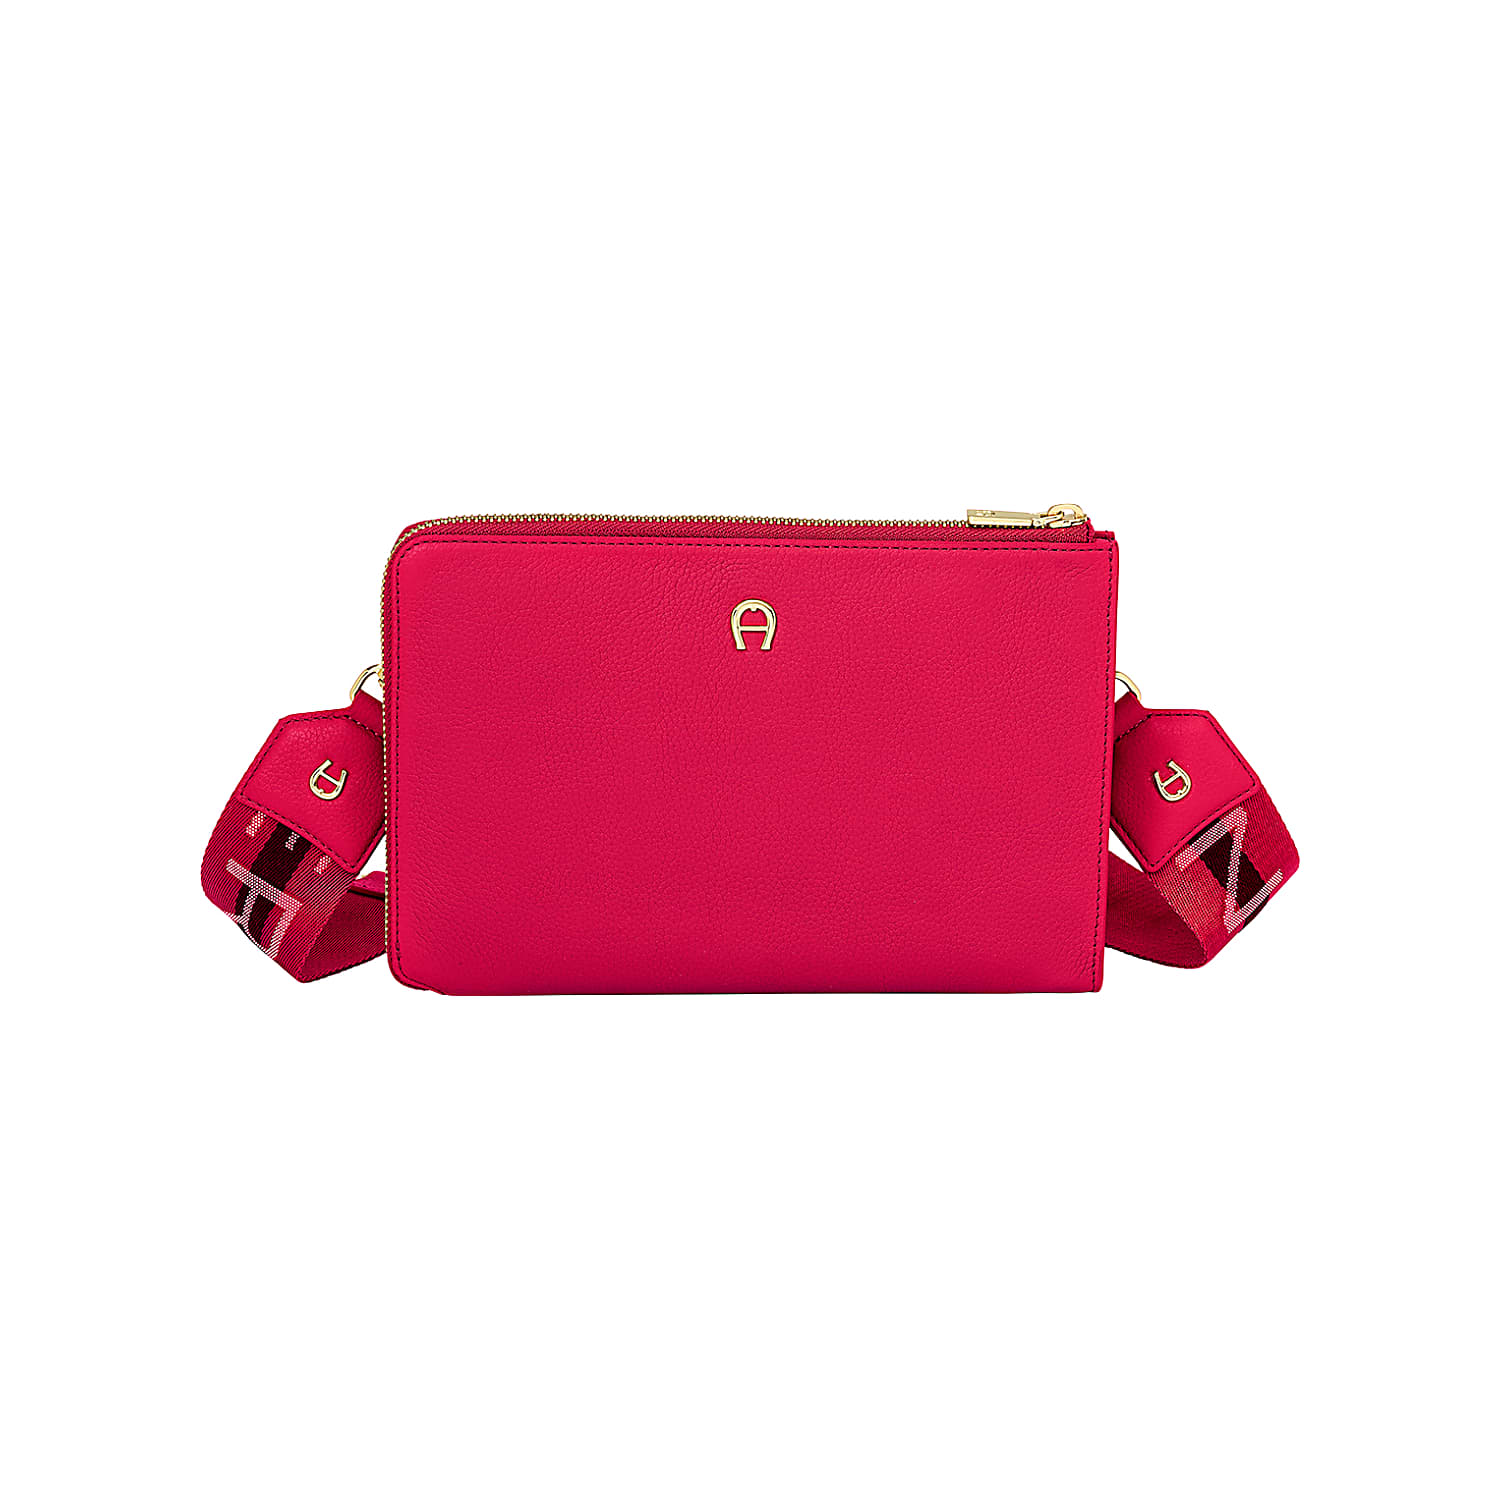 Fashion Pouch orchid pink